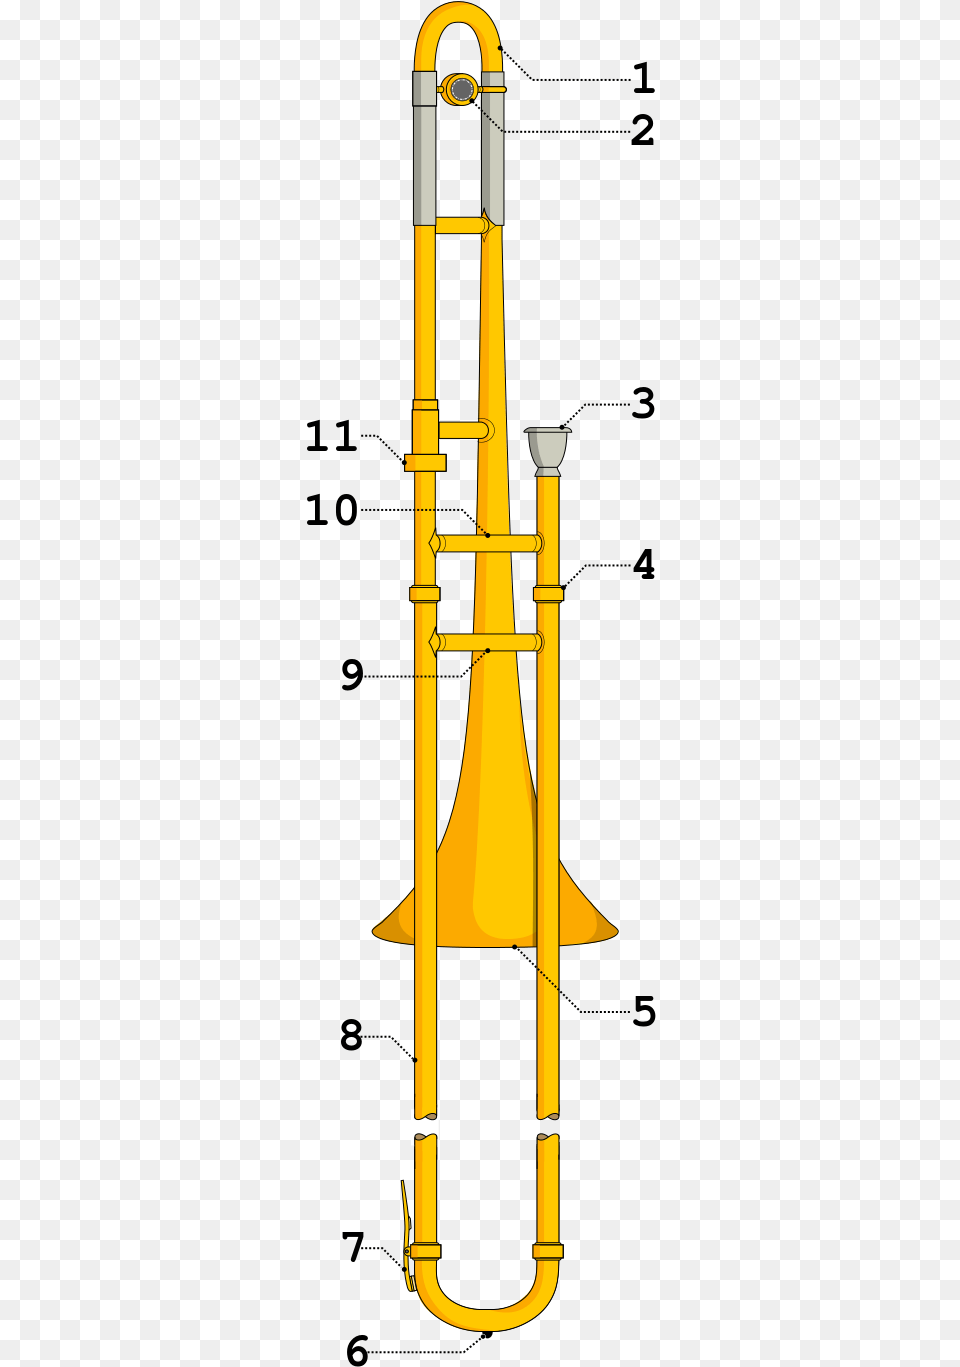 Diagram Of A Trombone, Musical Instrument, Brass Section, Bathroom, Indoors Png